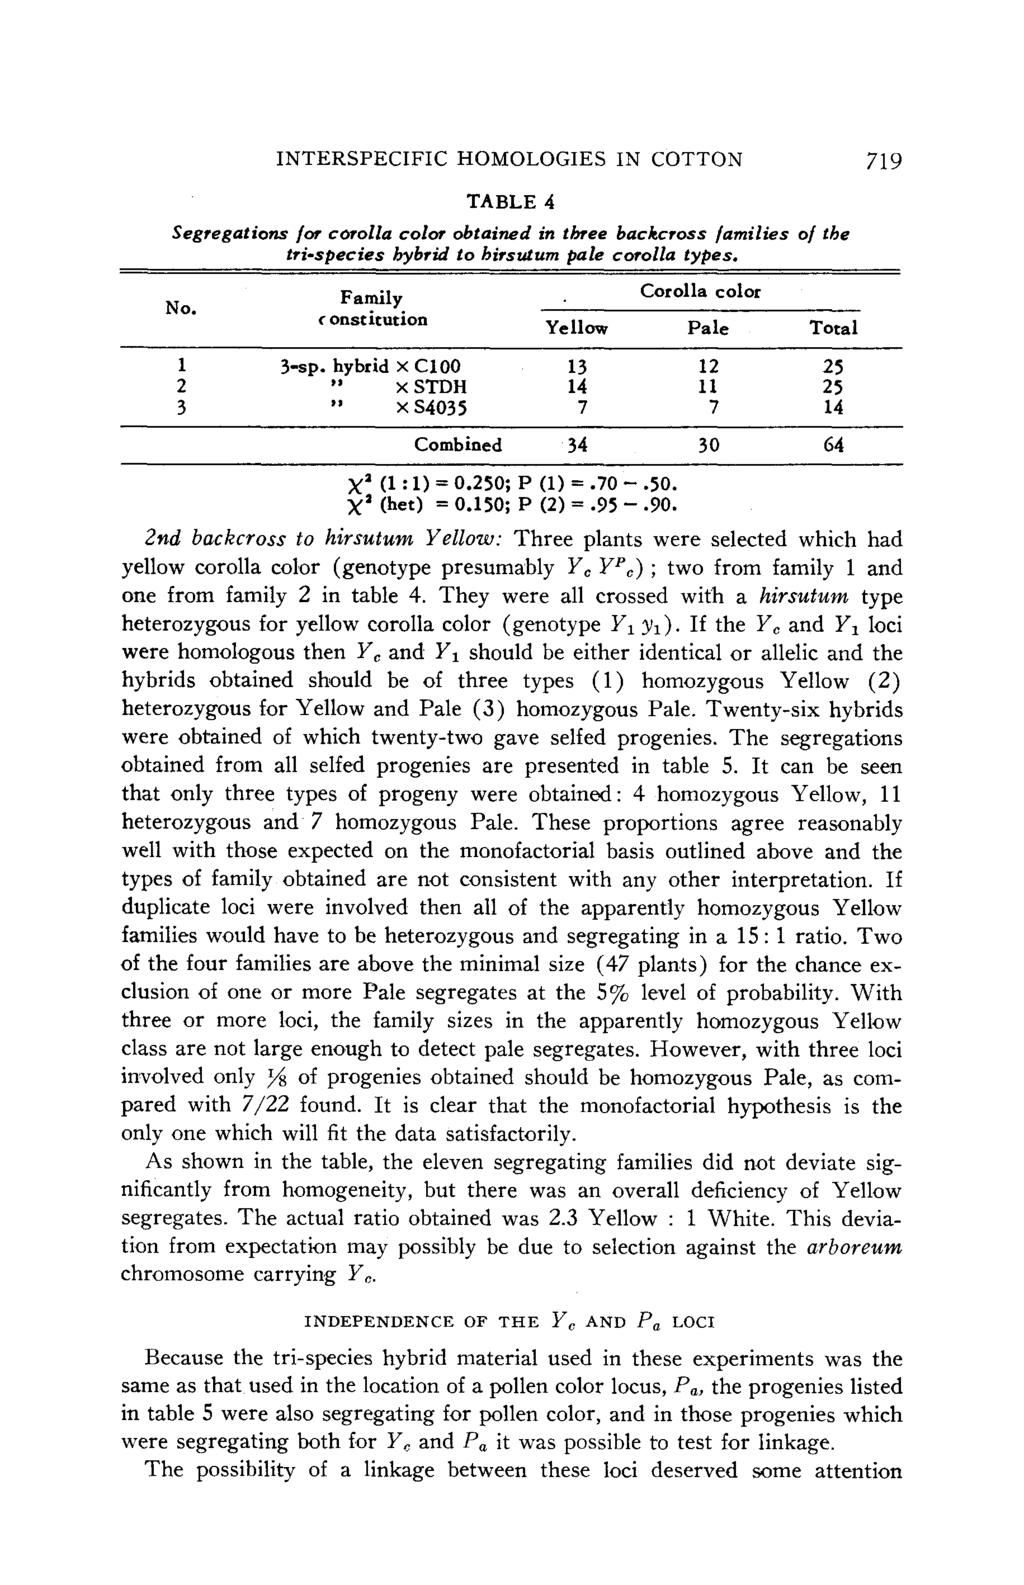 INTERSPECIFIC HOMOLOGIES IN COTTON 719 TABLE 4 Segregations for corolla color obtained in three backcross families of the tri-species hybrid io hirsutum pale corolla types. No.